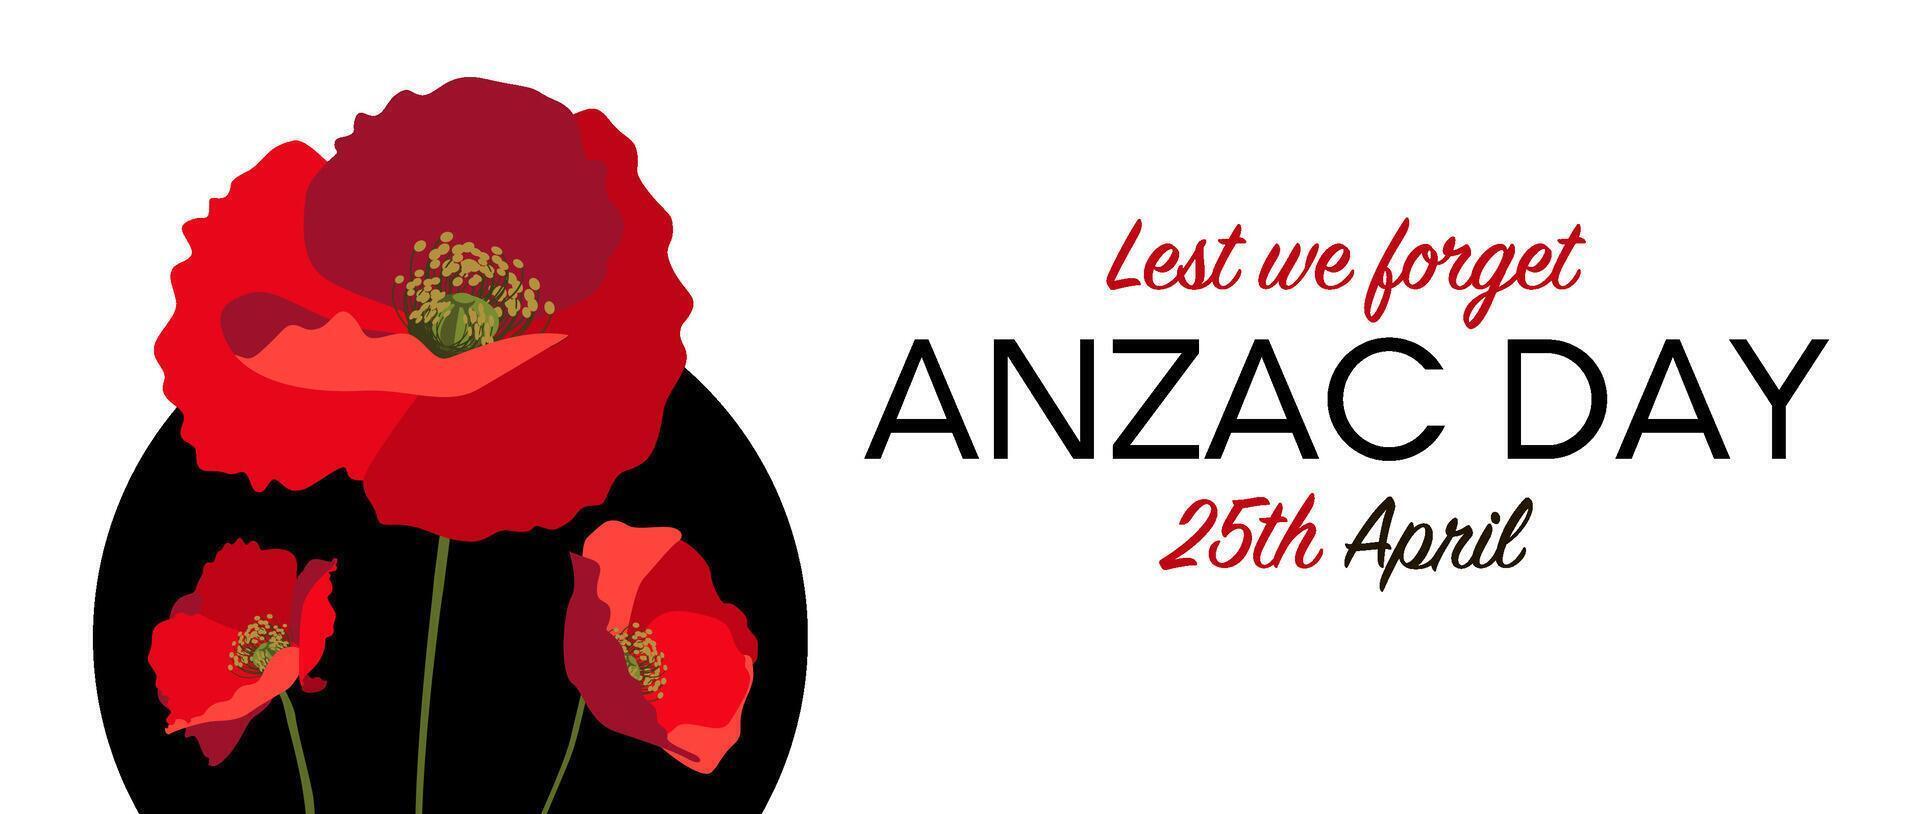 Anzac day horizontal banner layout with red poppies on black circle on white background vector